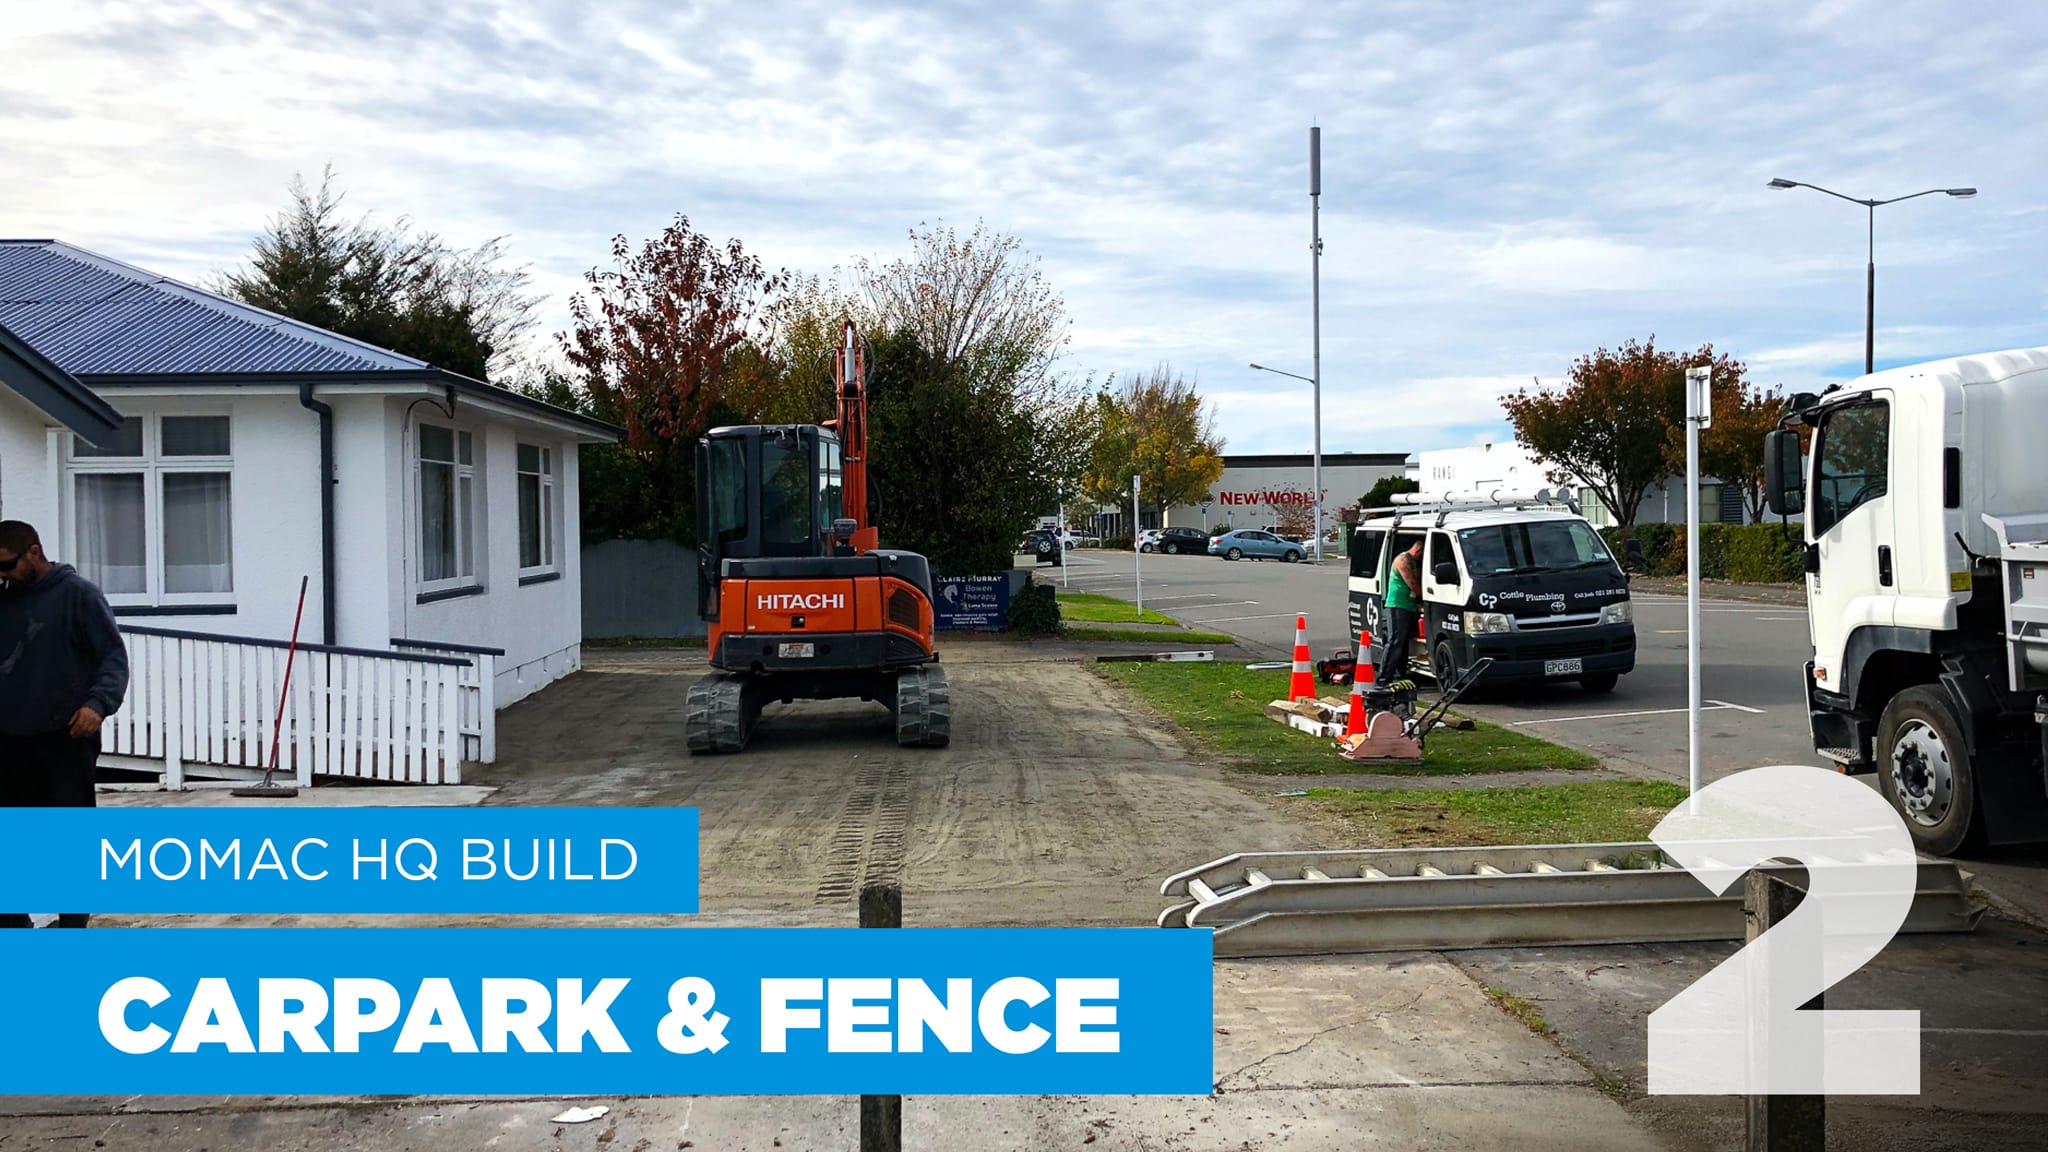 The MoMac creative agency office being renovated in Rangiora